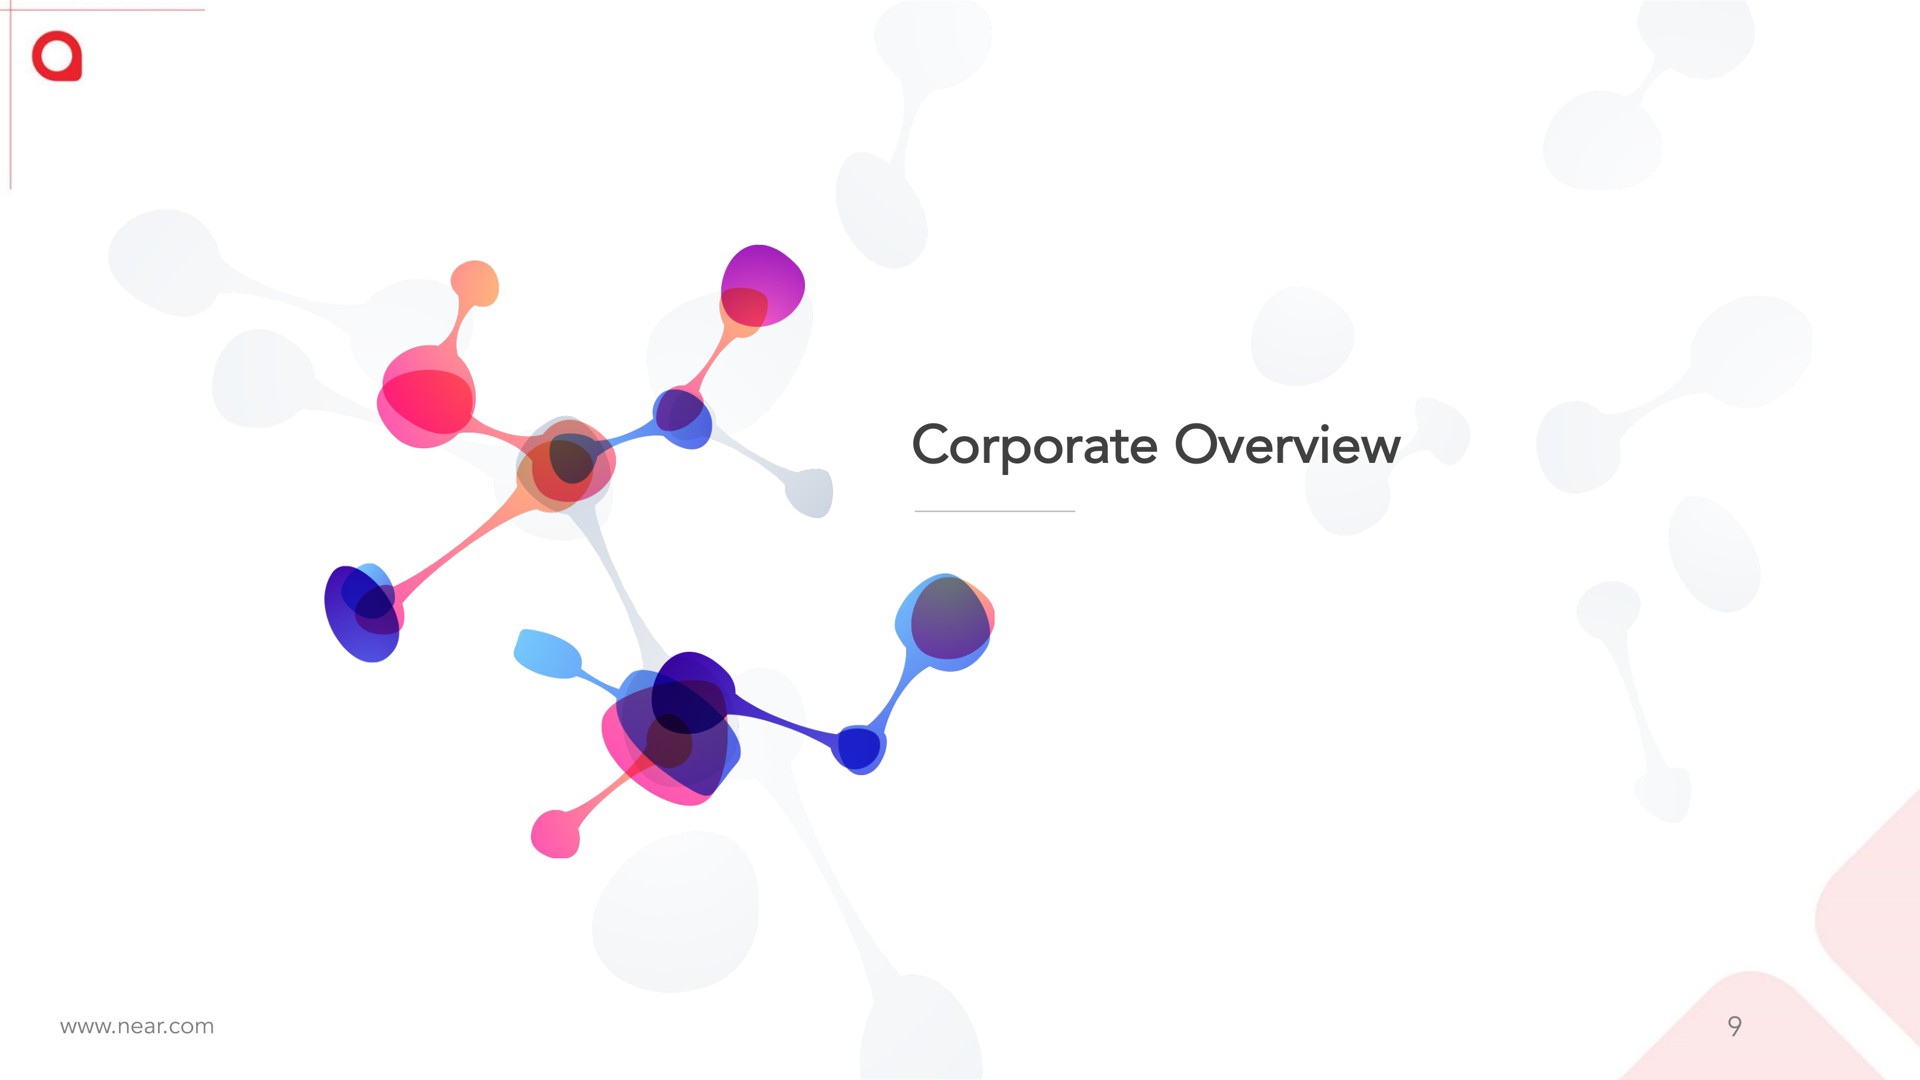 corporate overview | Near